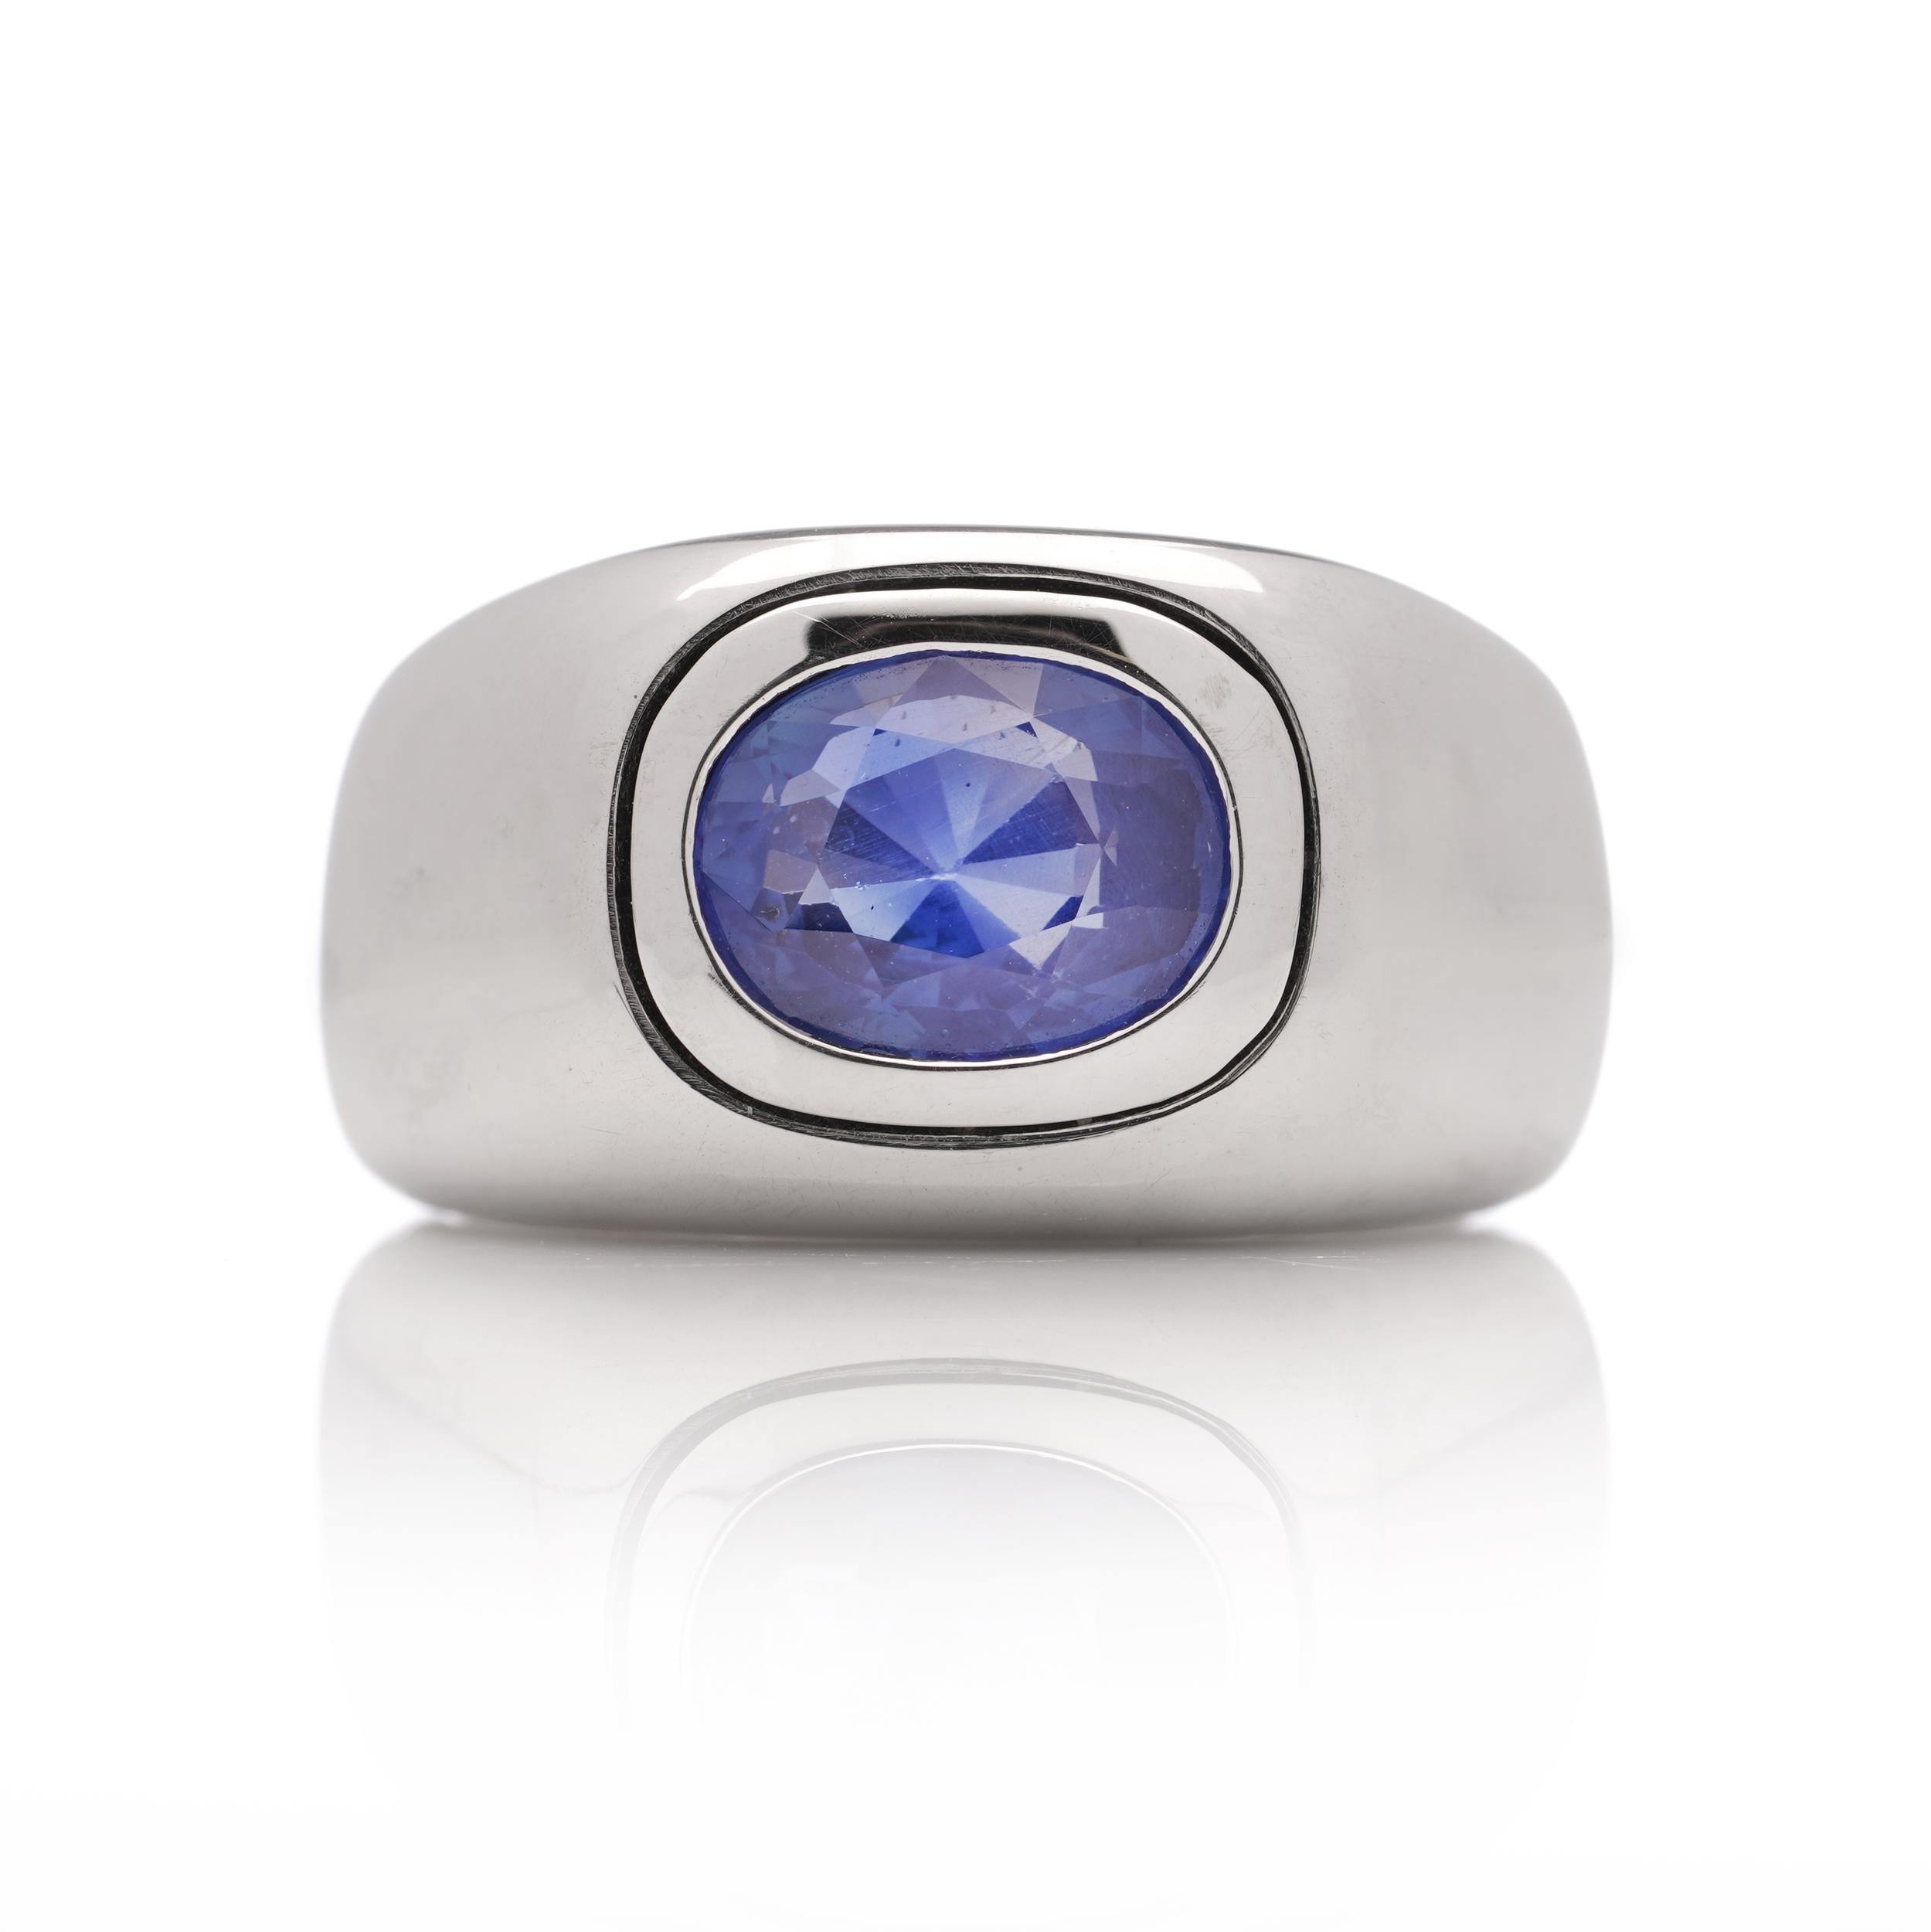 18kt. white gold 2.00 cts. natural sapphire men's dome fashion ring.
Hallmarked with 750 mark, maker's mark. ( Unidentified )

Dimensions -
Finger Size (UK) = M 1/2 (EU) = 54.5 (US) = 6.75
Weight: 33 grams
Ring Size: 2.6 x 2.2 x 1.2 cm

Sapphire